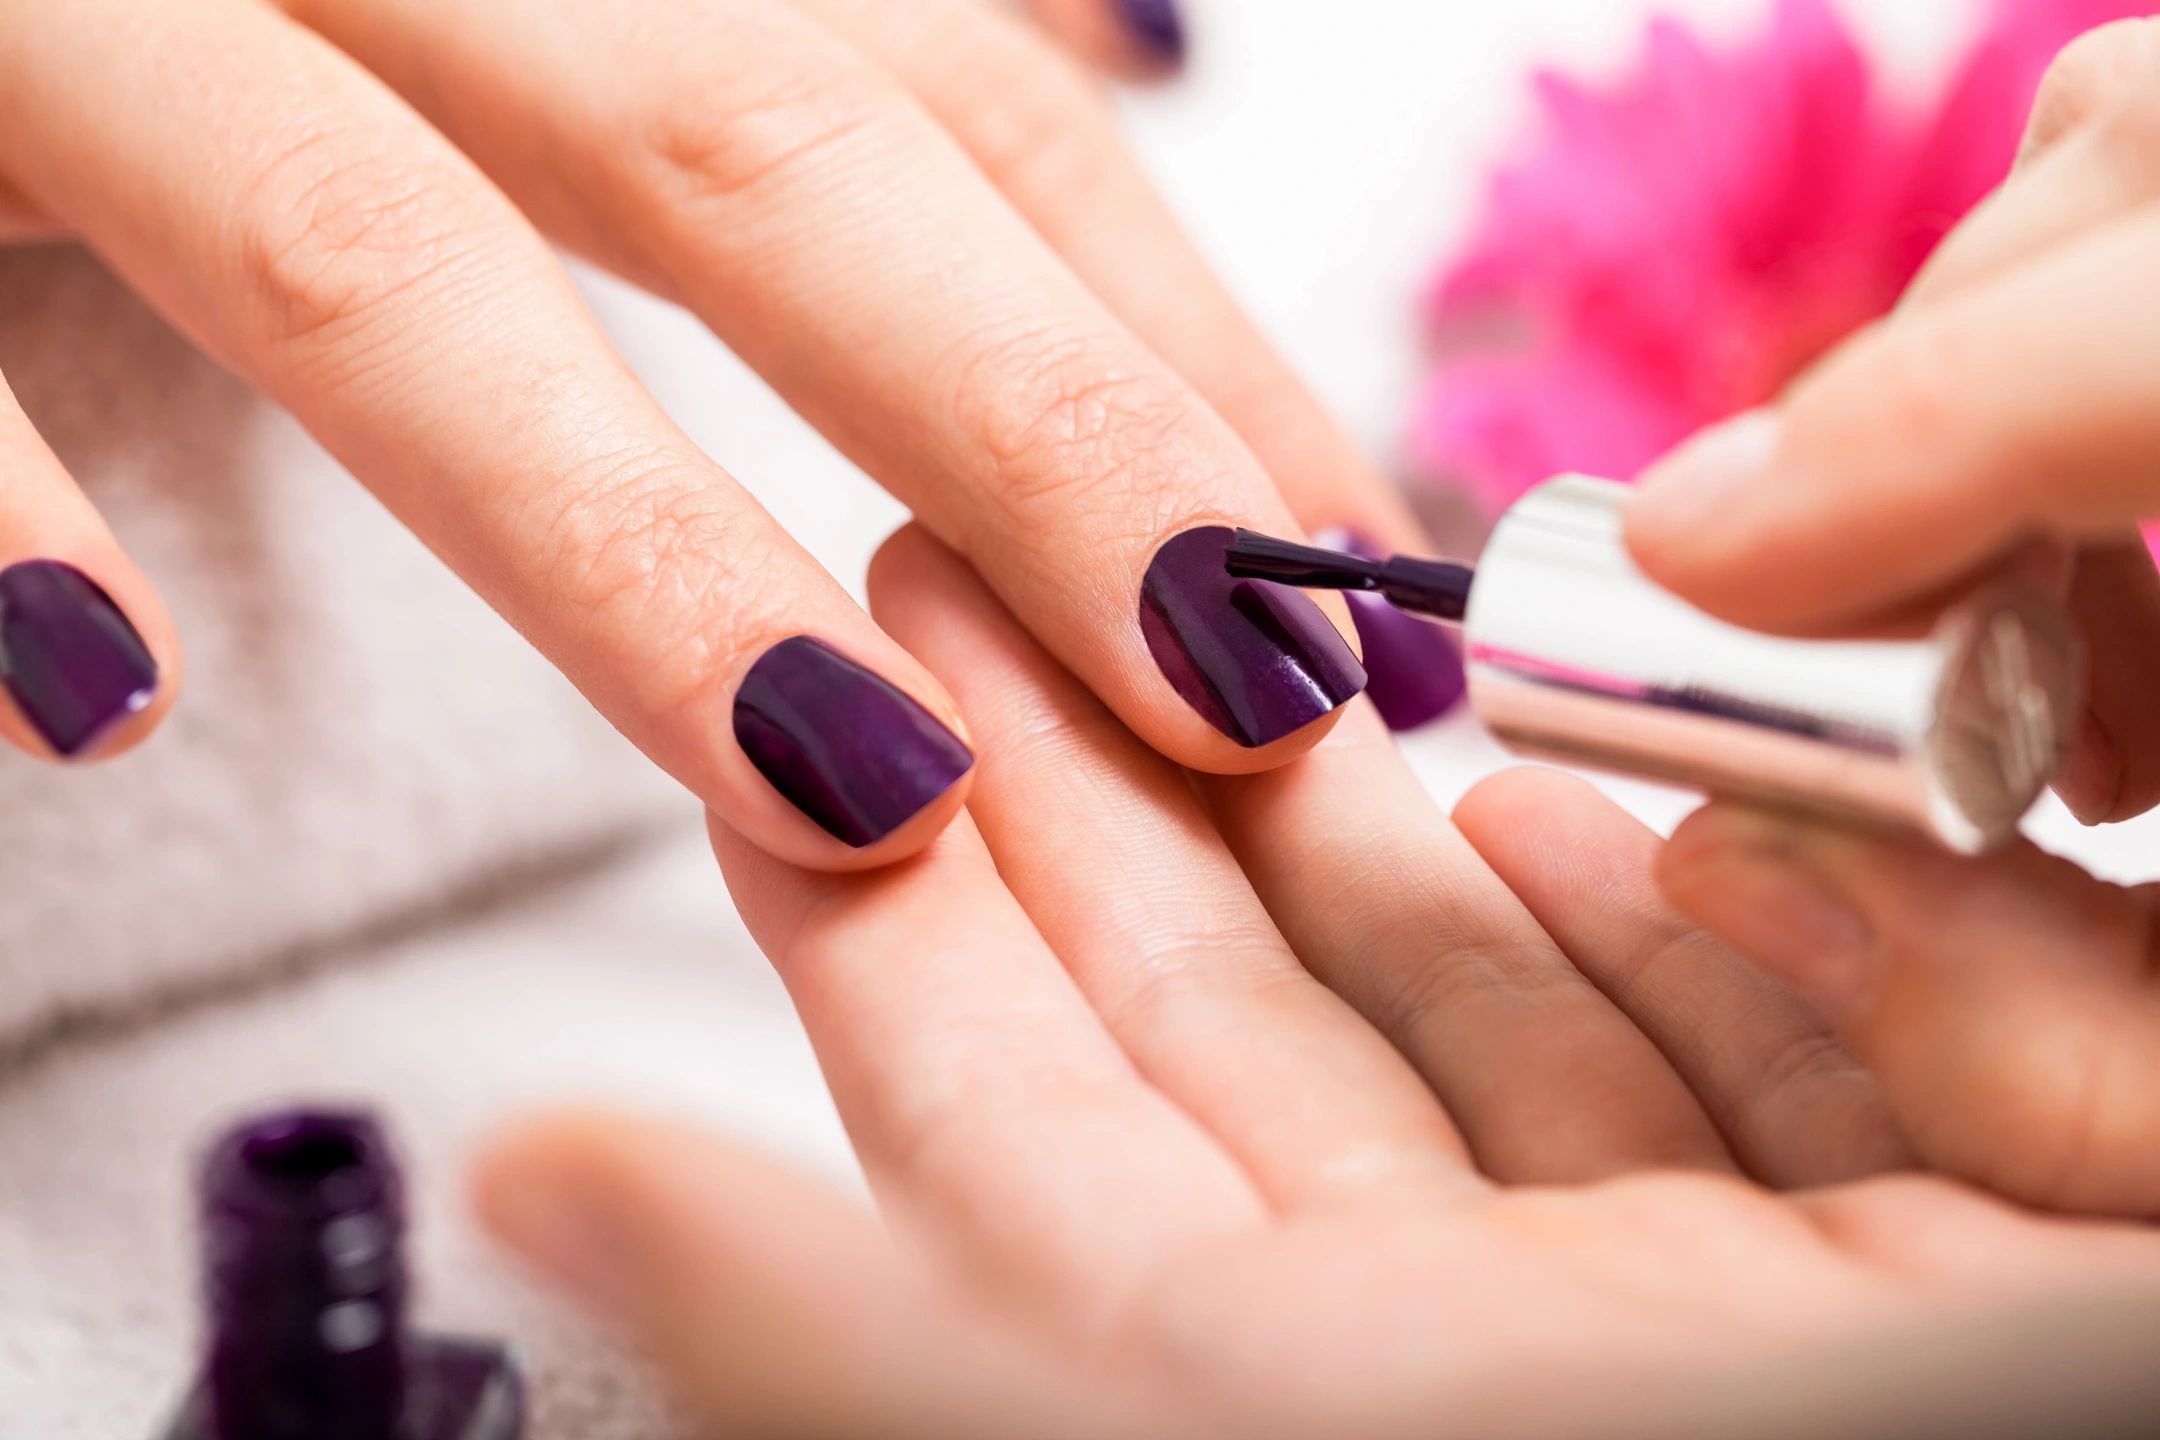 Certified Nail Technician Diploma, Nail Art Extension Course